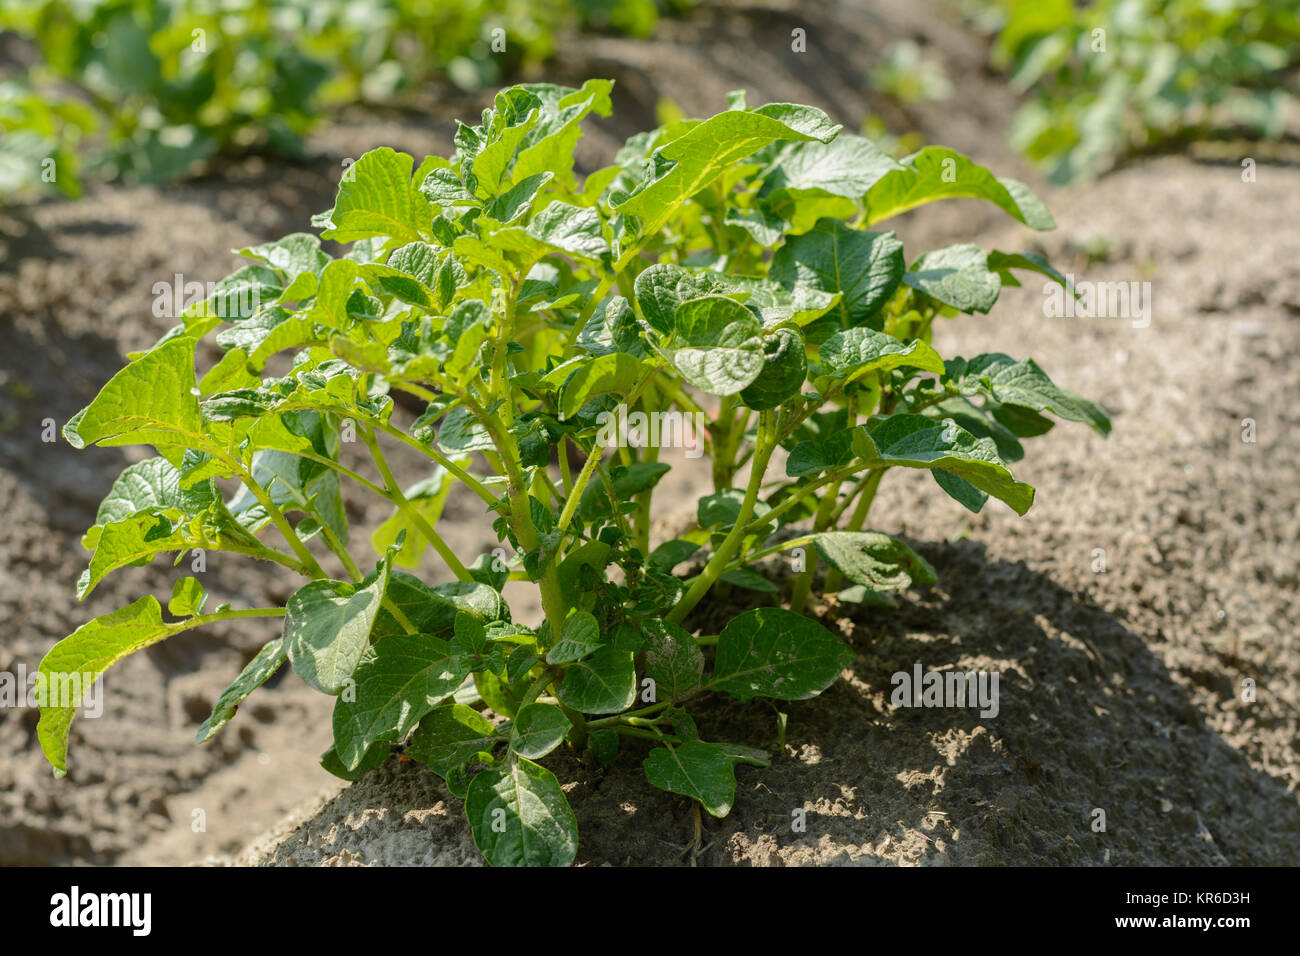 Kartoffelpflanze High Resolution Stock Photography and Images - Alamy